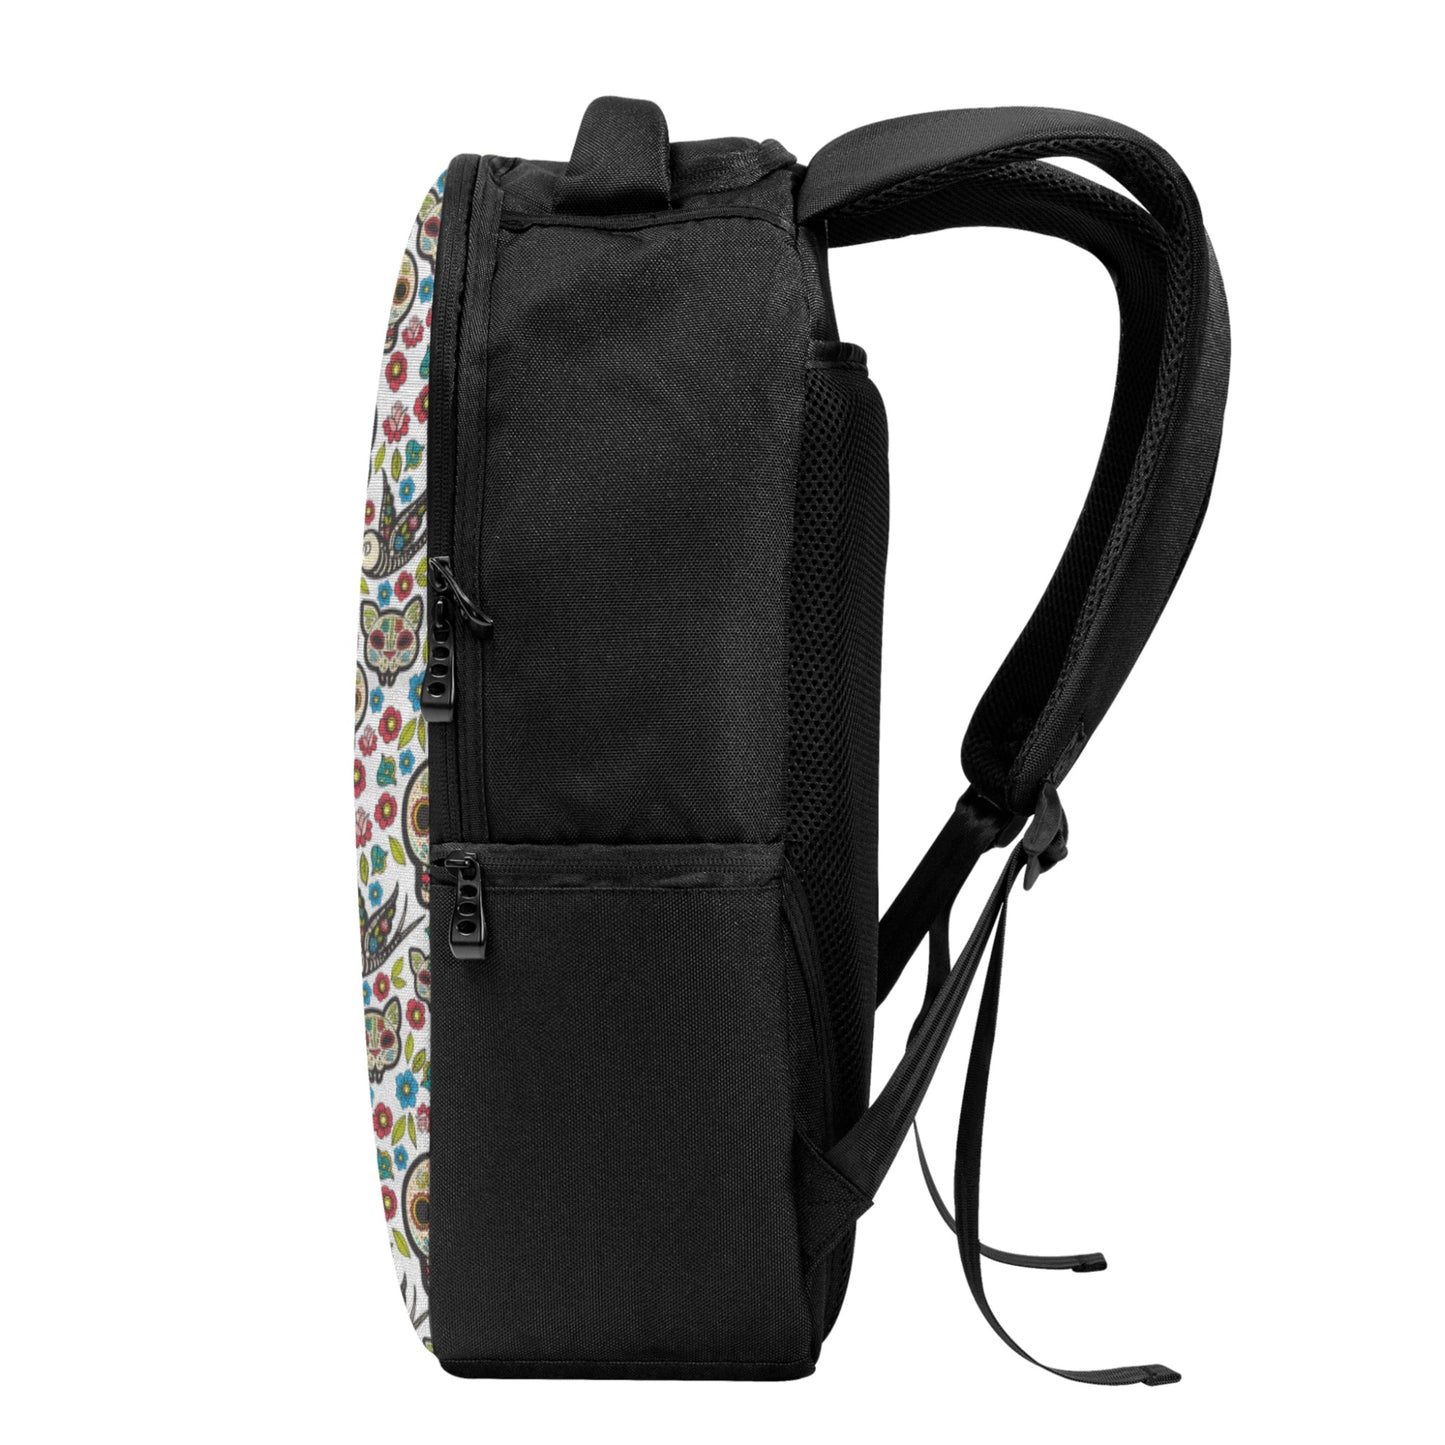 Day of the dead sugar skull gothic Laptop Backpack